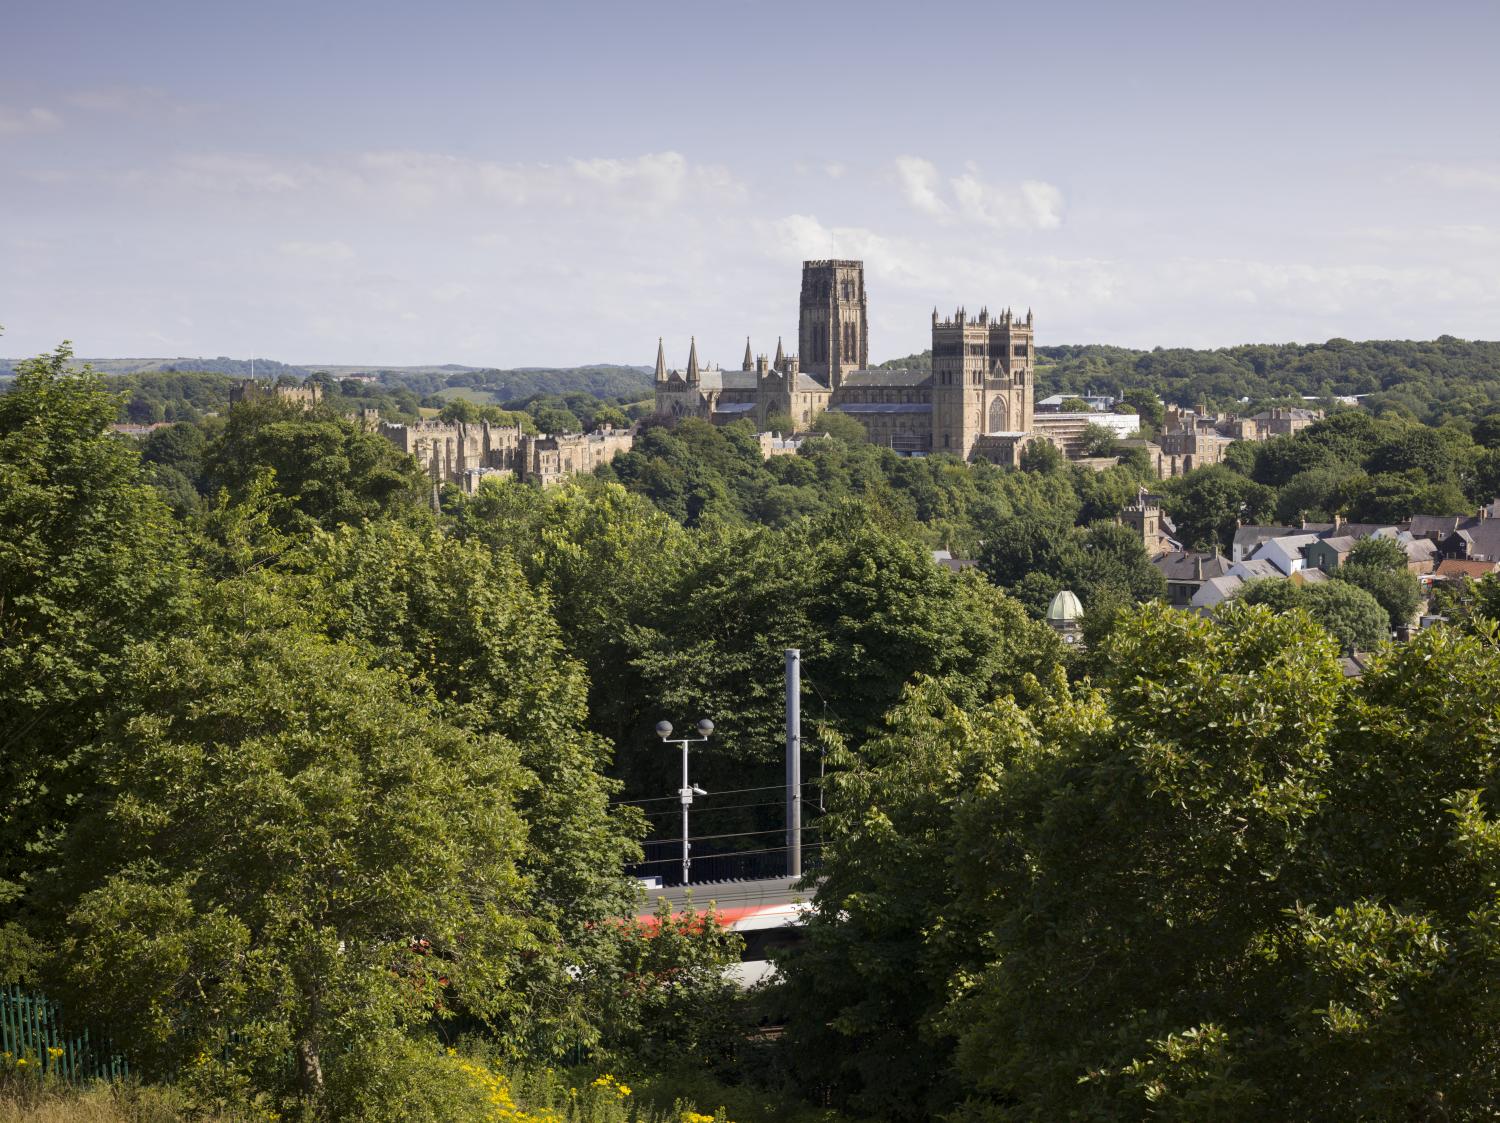 A photograph of a landscape view over the top of trees, with a cathedral in the distance underneath a blue sky.